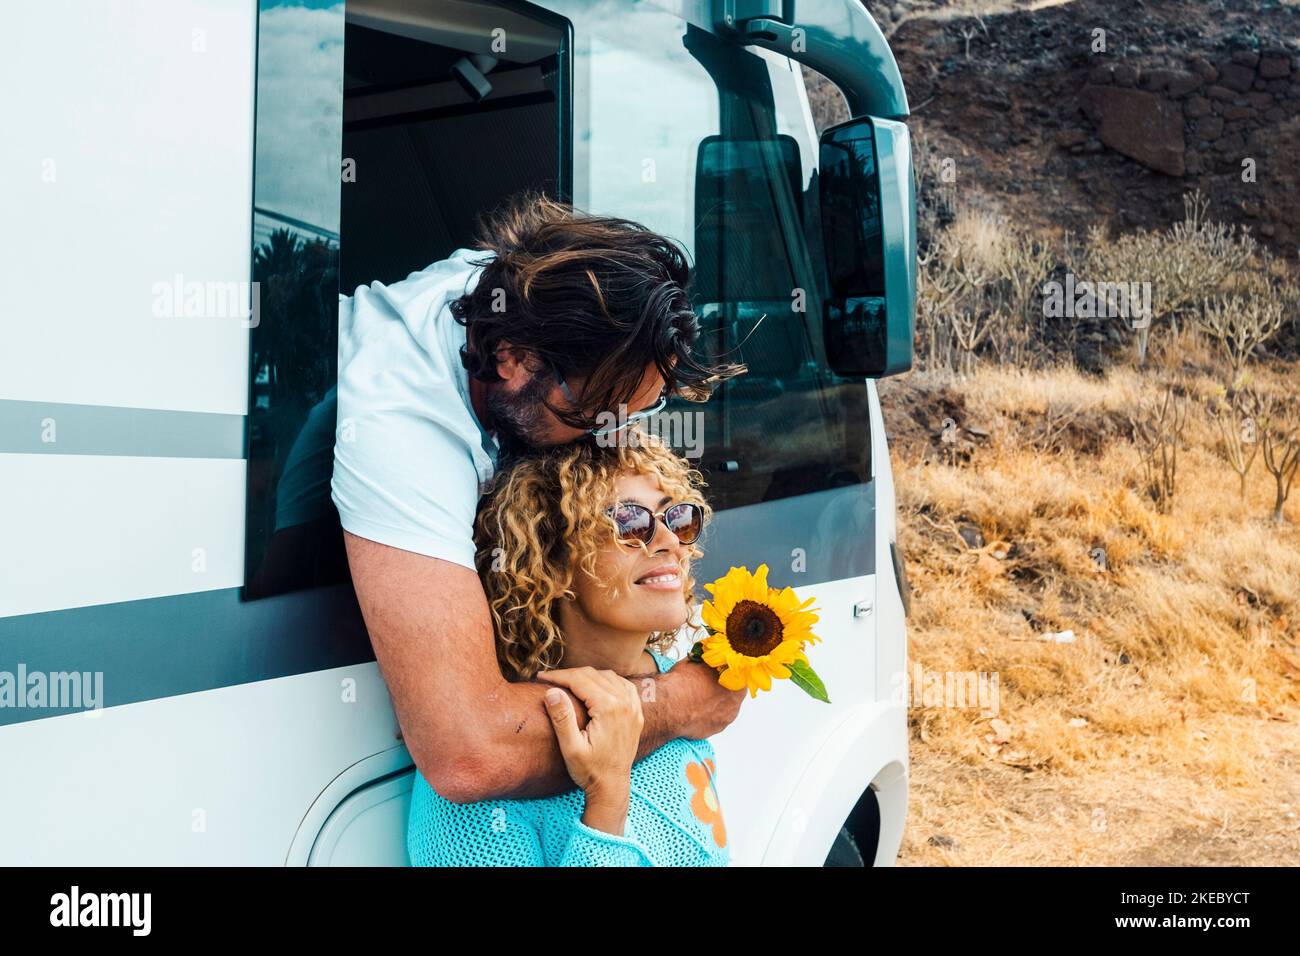 Man kissing woman and both enjoy travel lifestyle. Happy couple hug and smile in relationship against a modern camper van motor home. Alternative vacation on the road and freedom off grid life Stock Photo